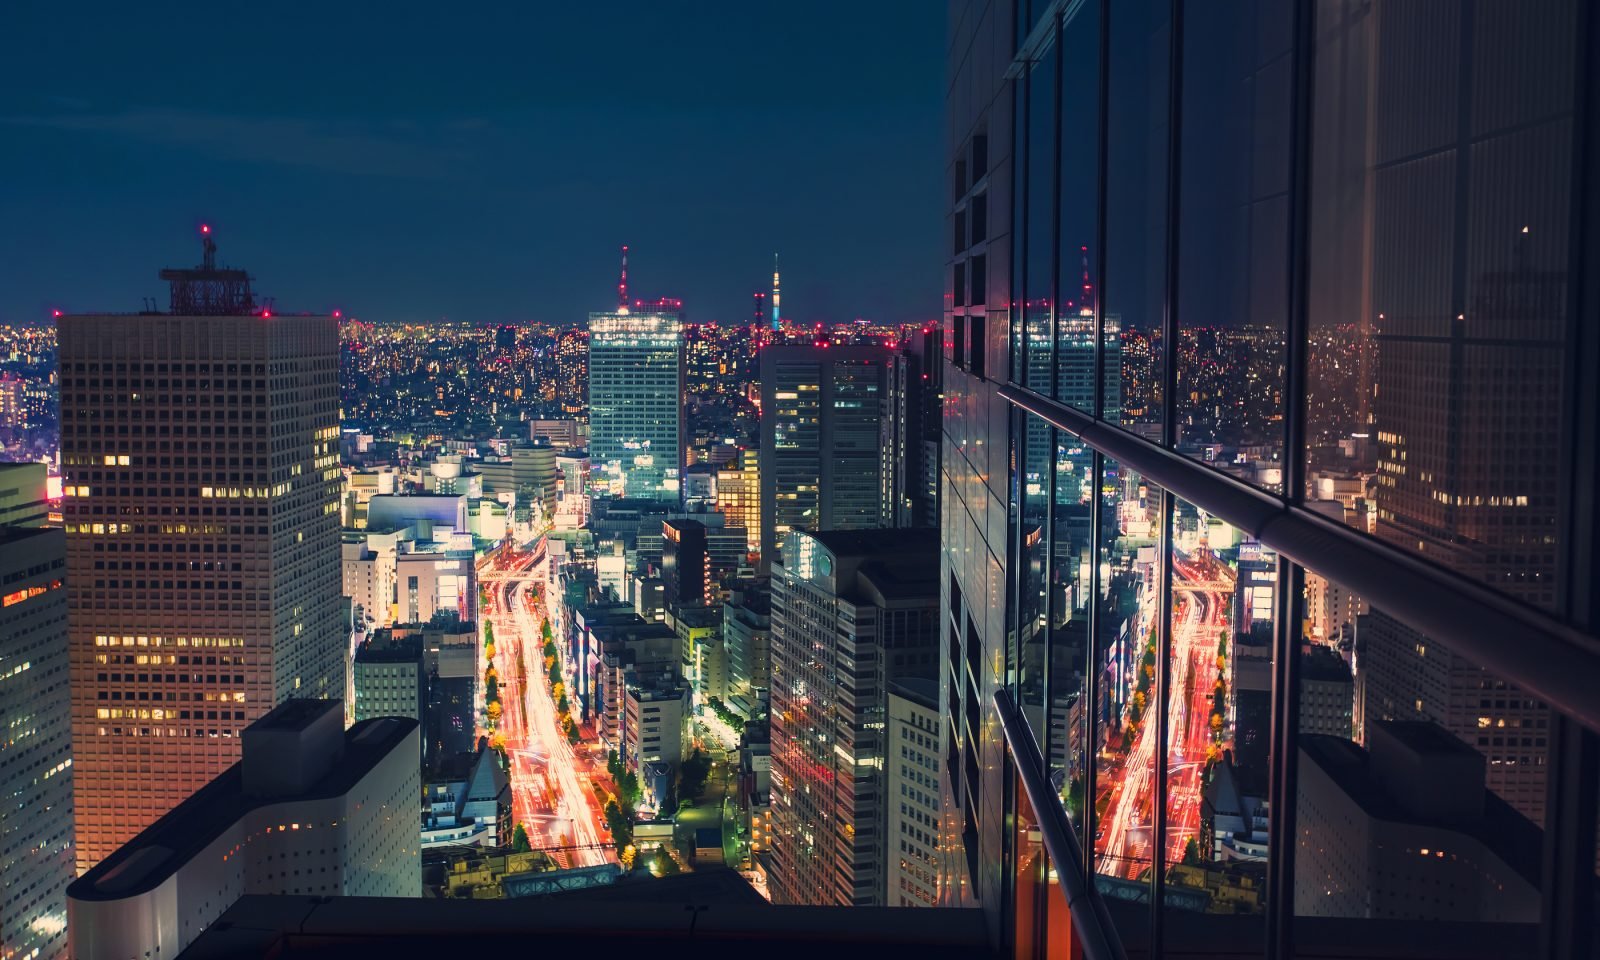 Aerial View Cityscape At Night In Tokyo, Japan From A Skyscraper